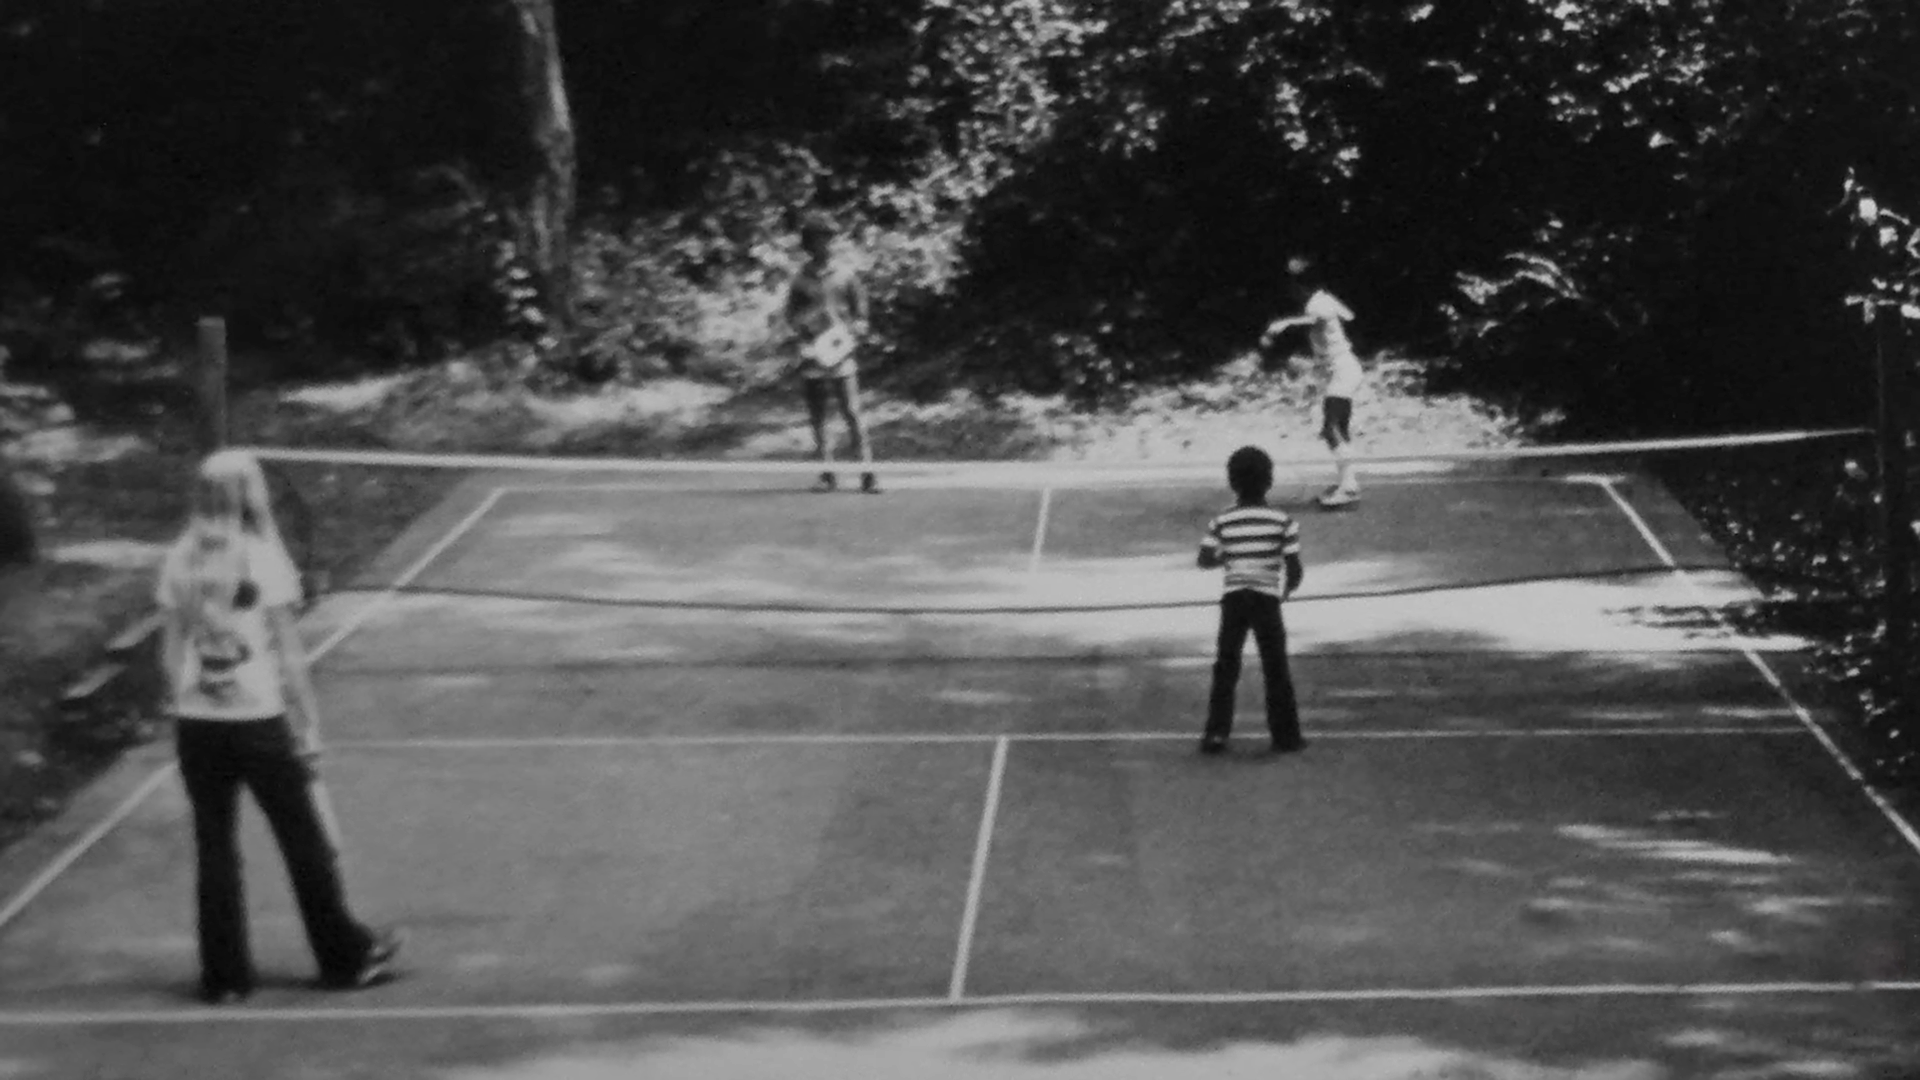 How did pickleball get its name - The first permanent pickleball court